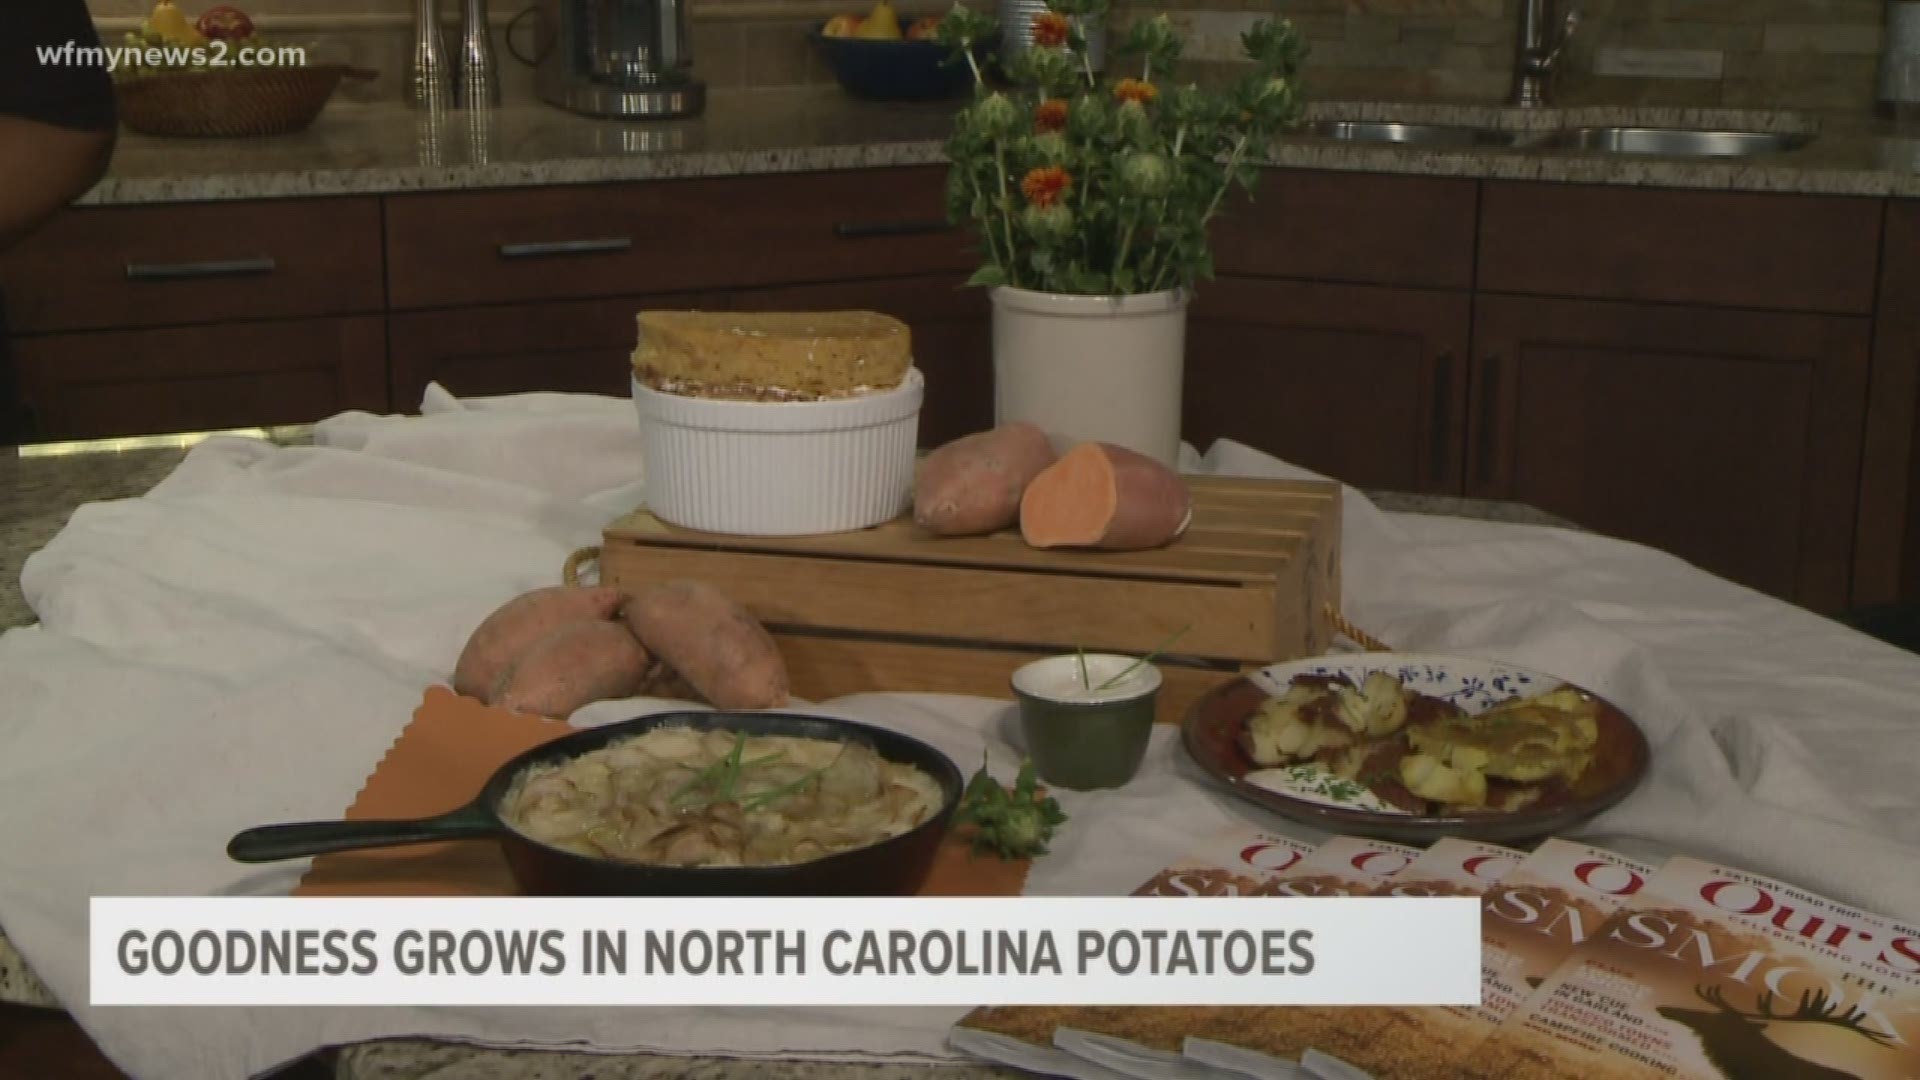 Roasted, scalloped or smashed, Our State Magazine has three delicious ways to serve up North Carolina potatoes.